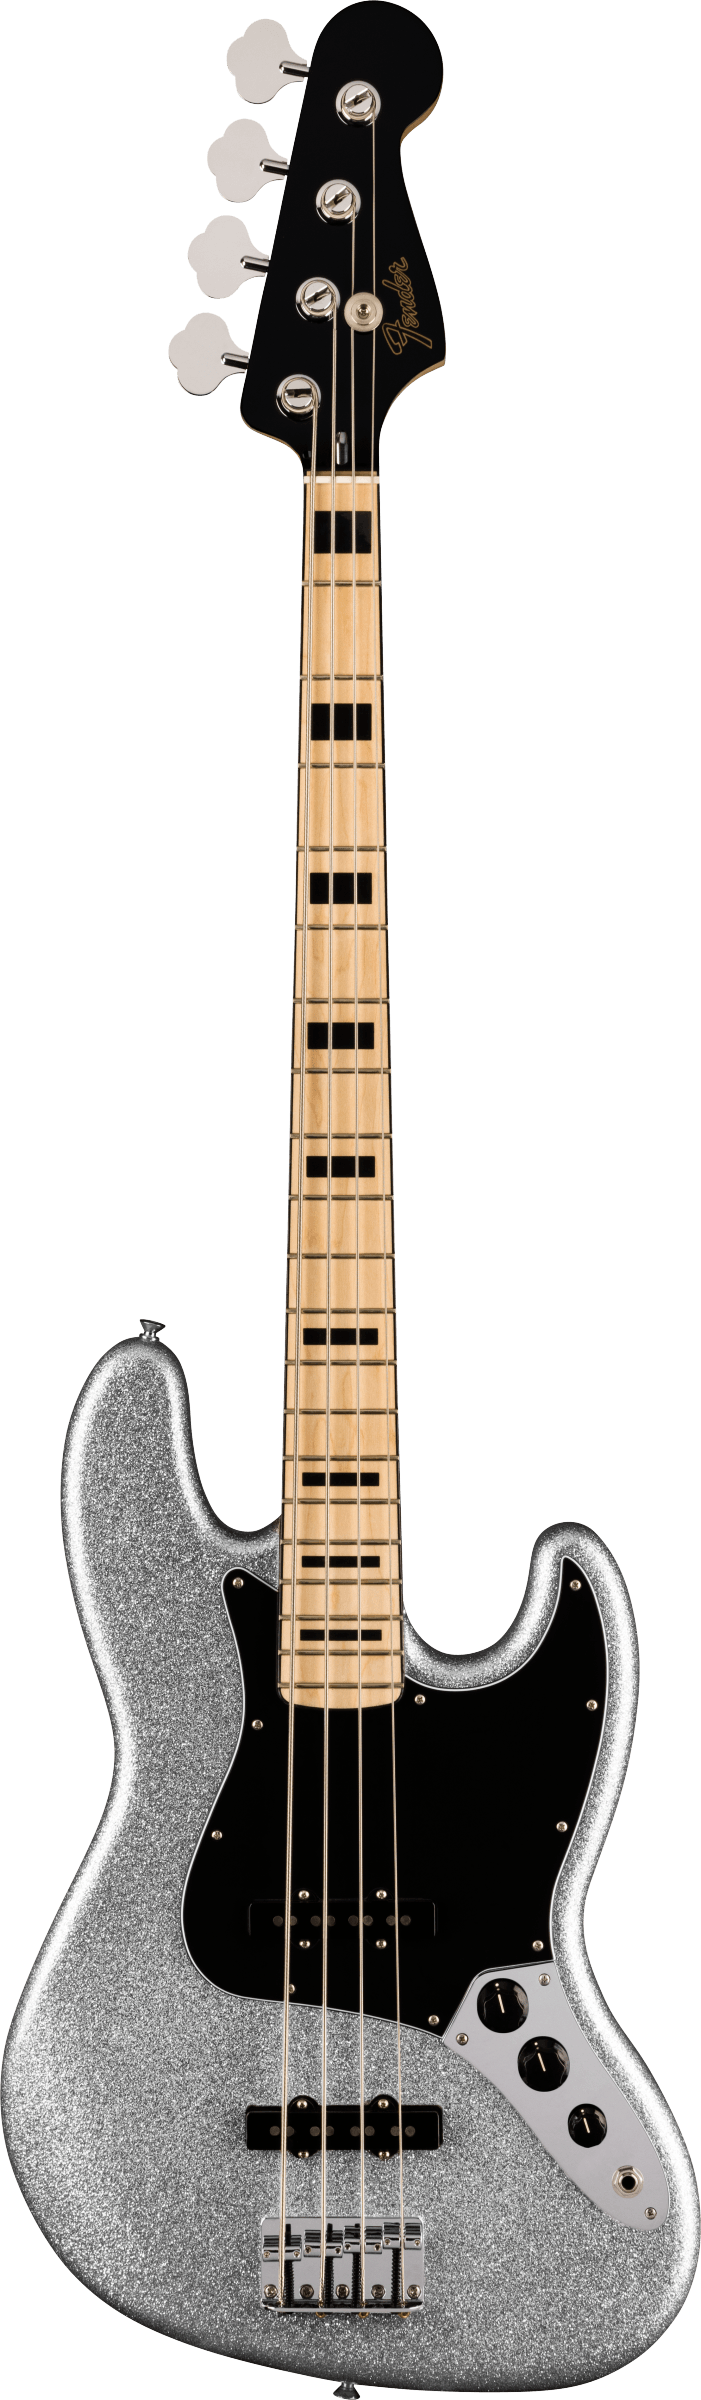 Fender Limited Edition Mikey Way Jazz Bass - Silver Sparkle